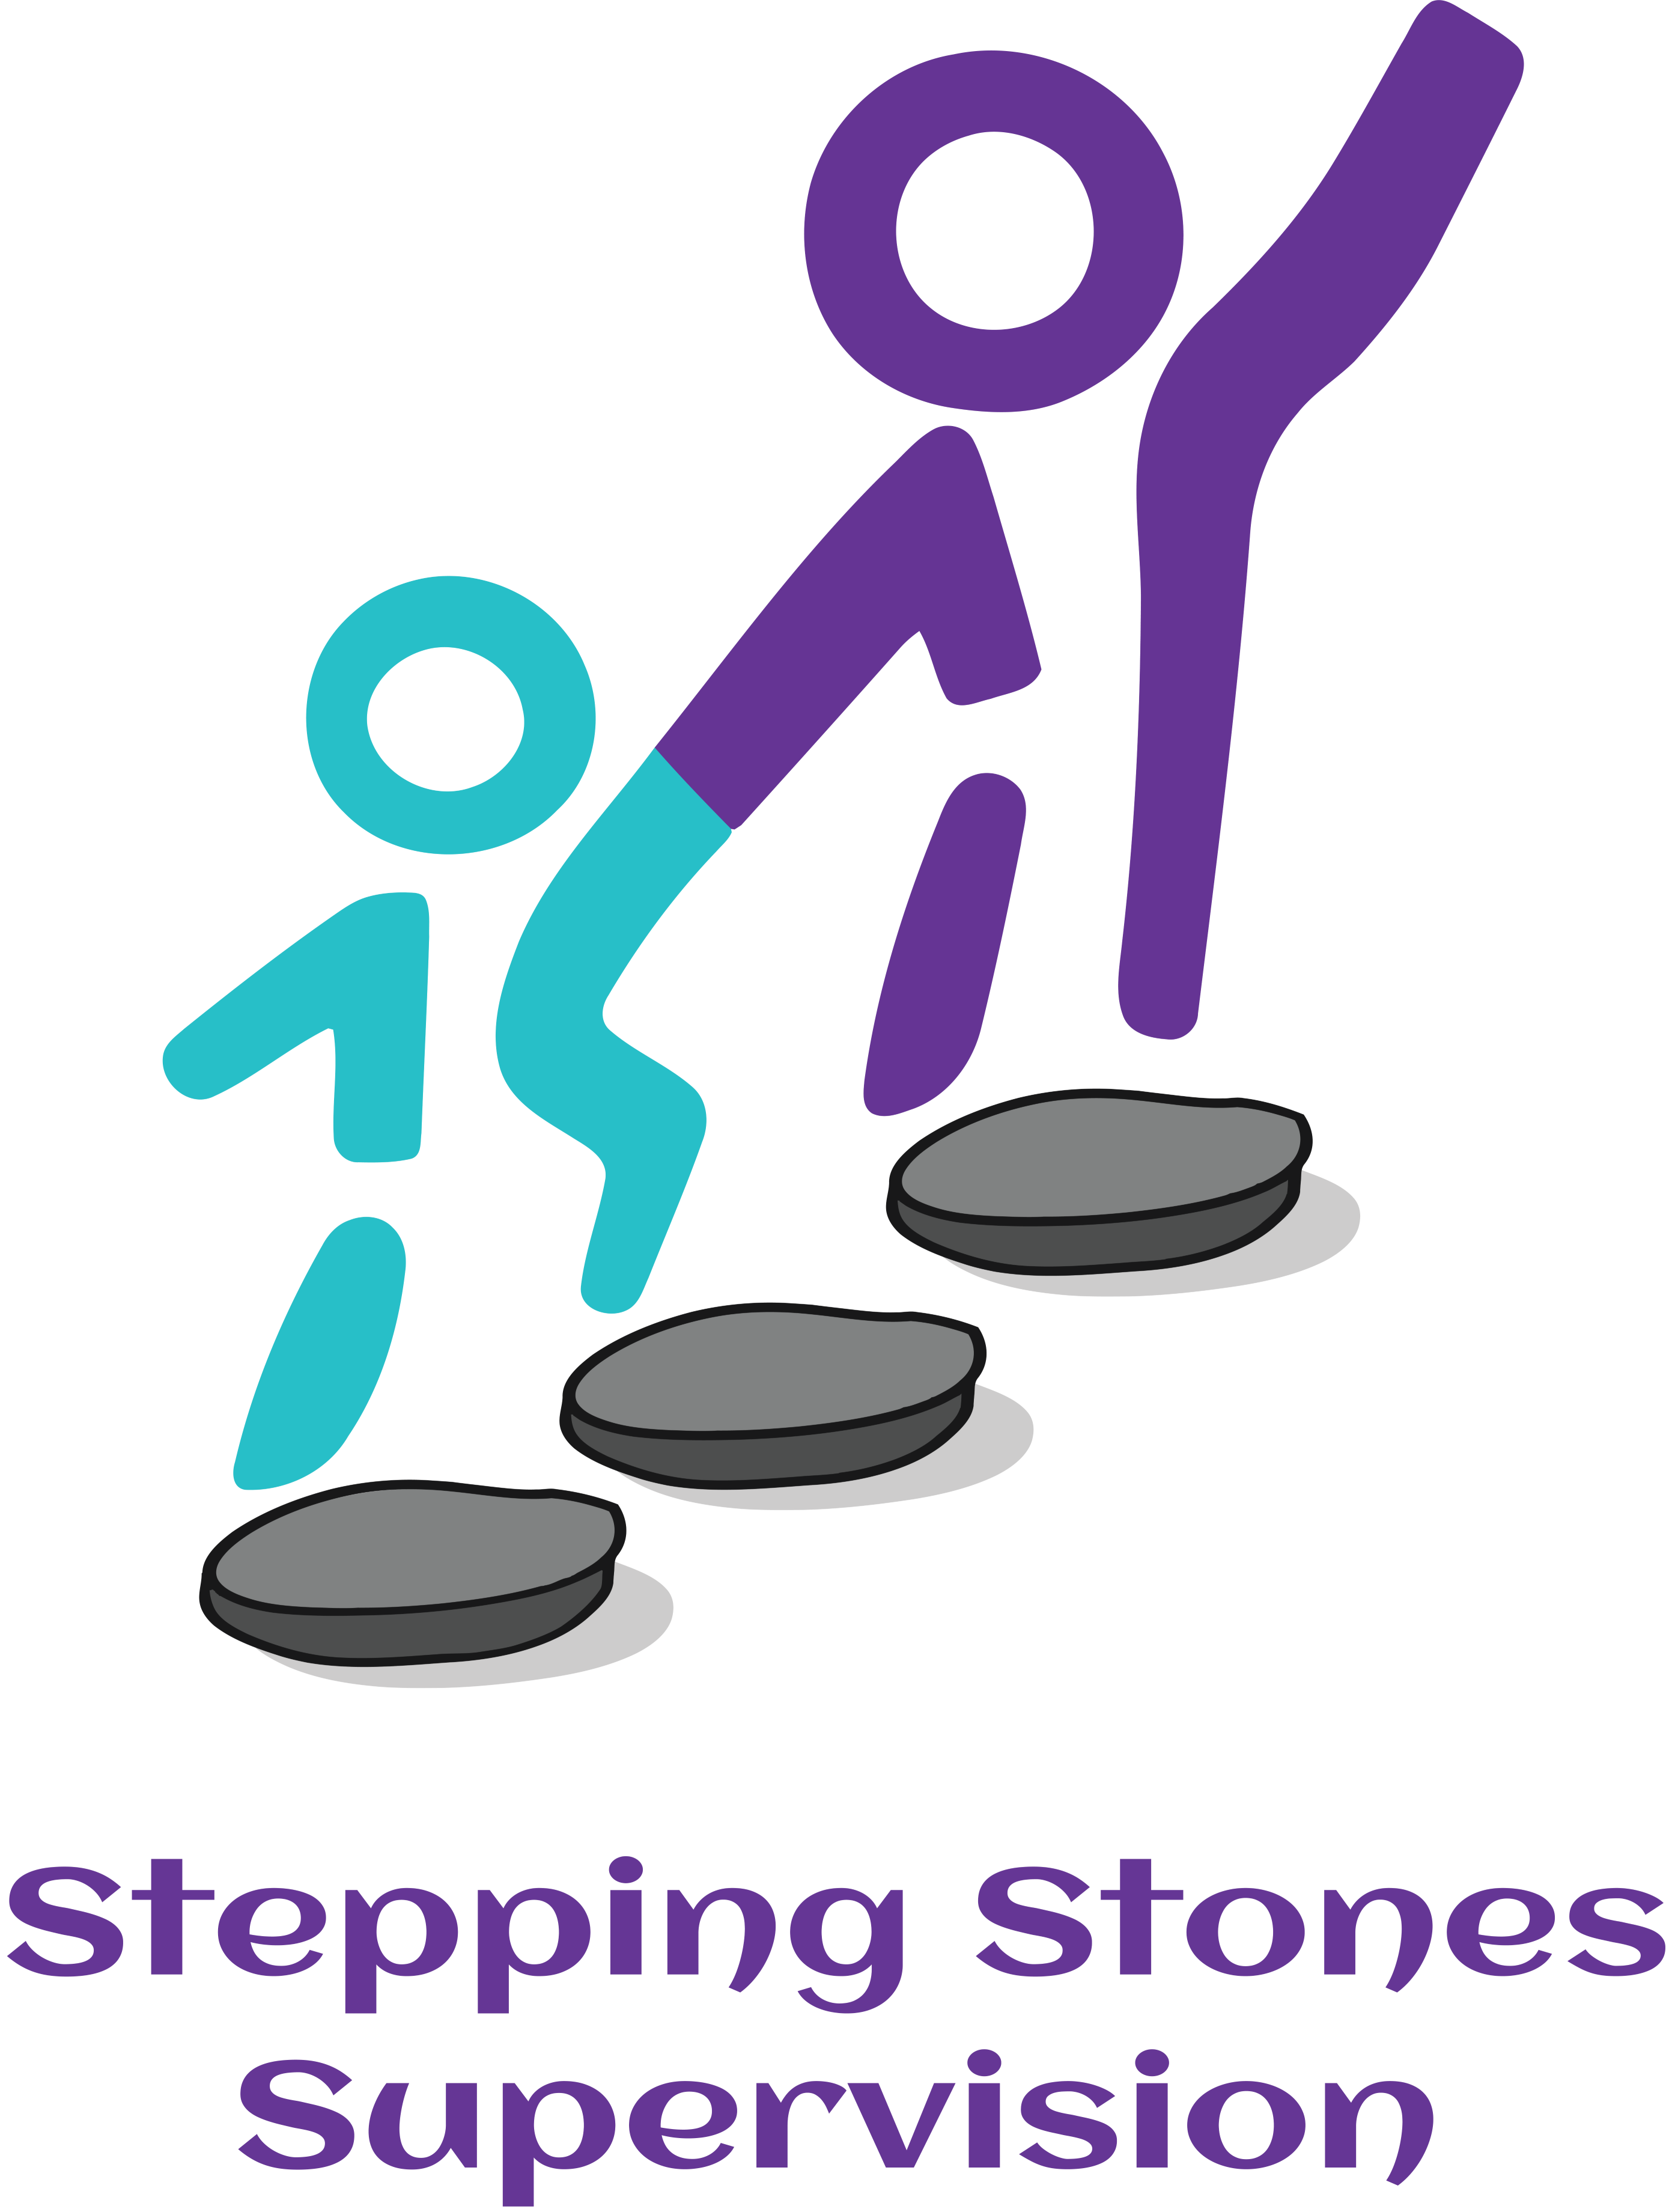 Contact Centre Supervision - Gold Coast - Stepping Stone Supervision